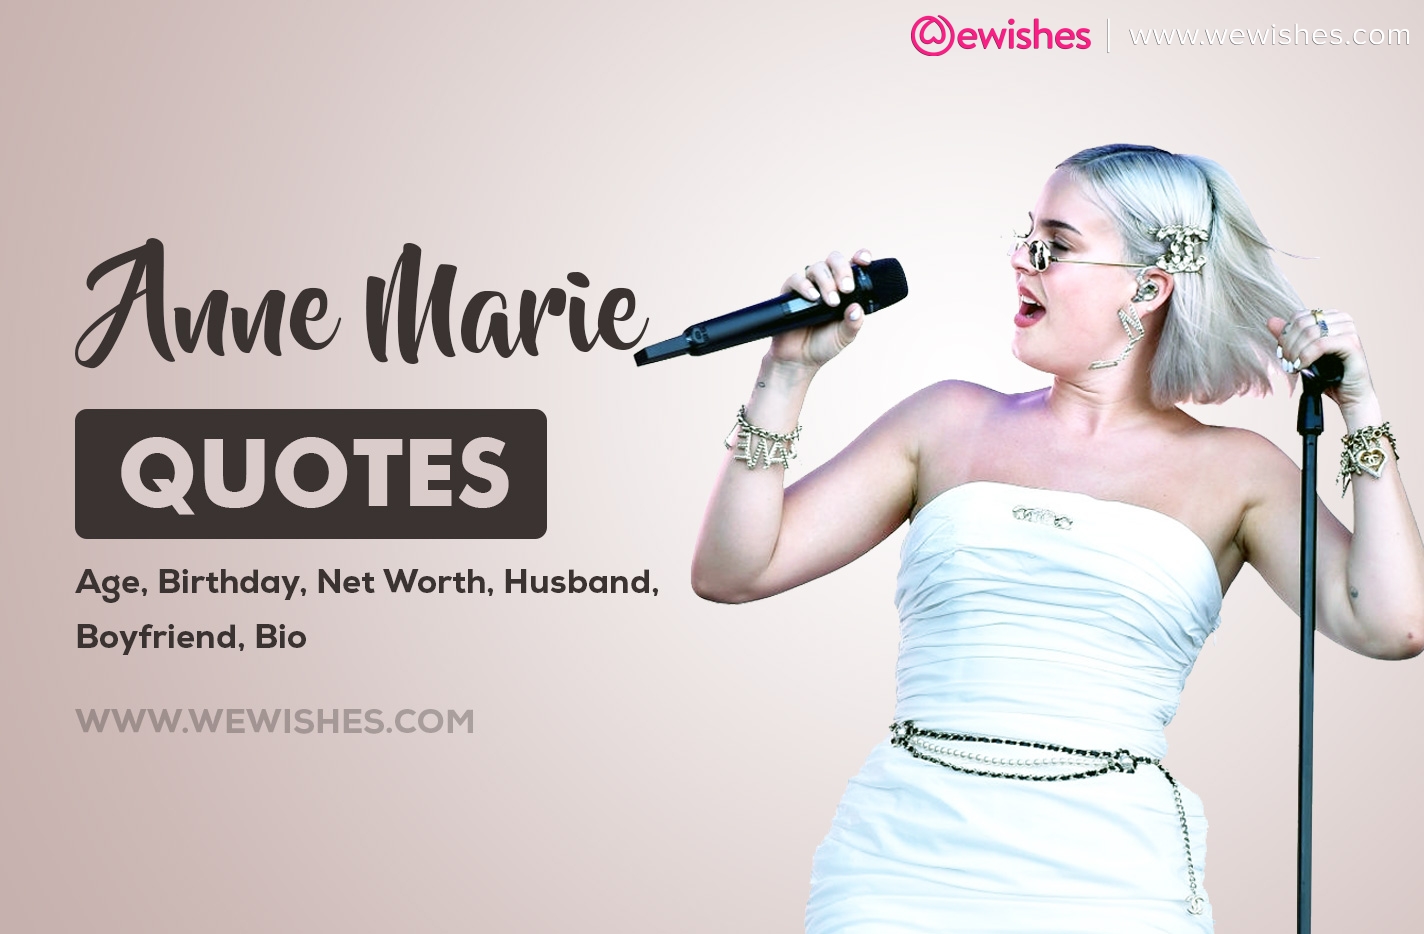 Anne Marie Quotes